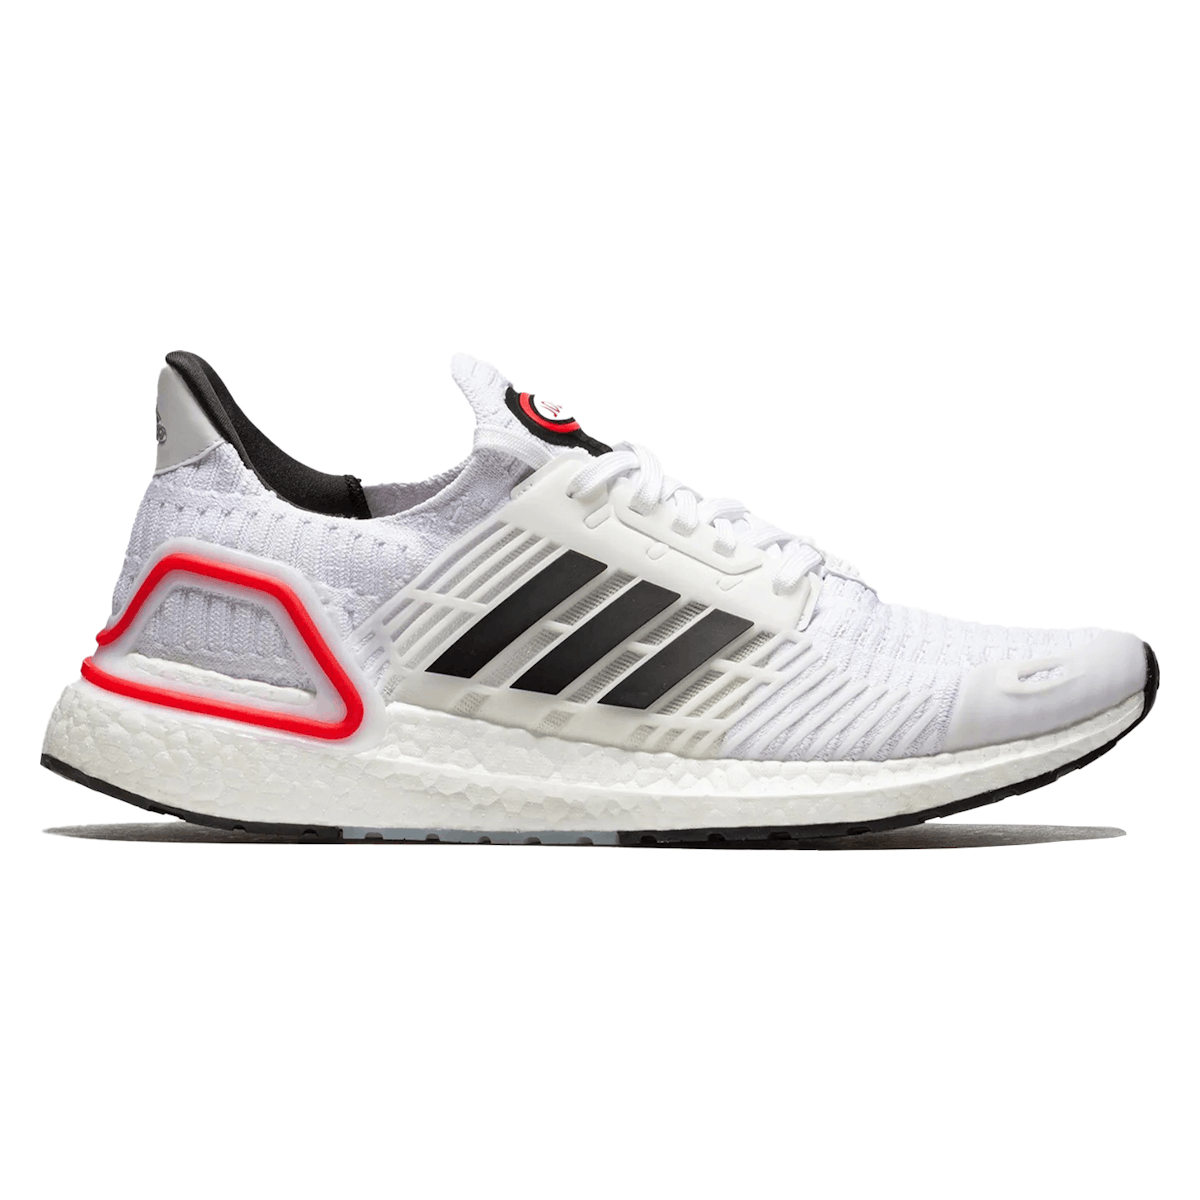 adidas Ultraboost Climacool 1 DNA